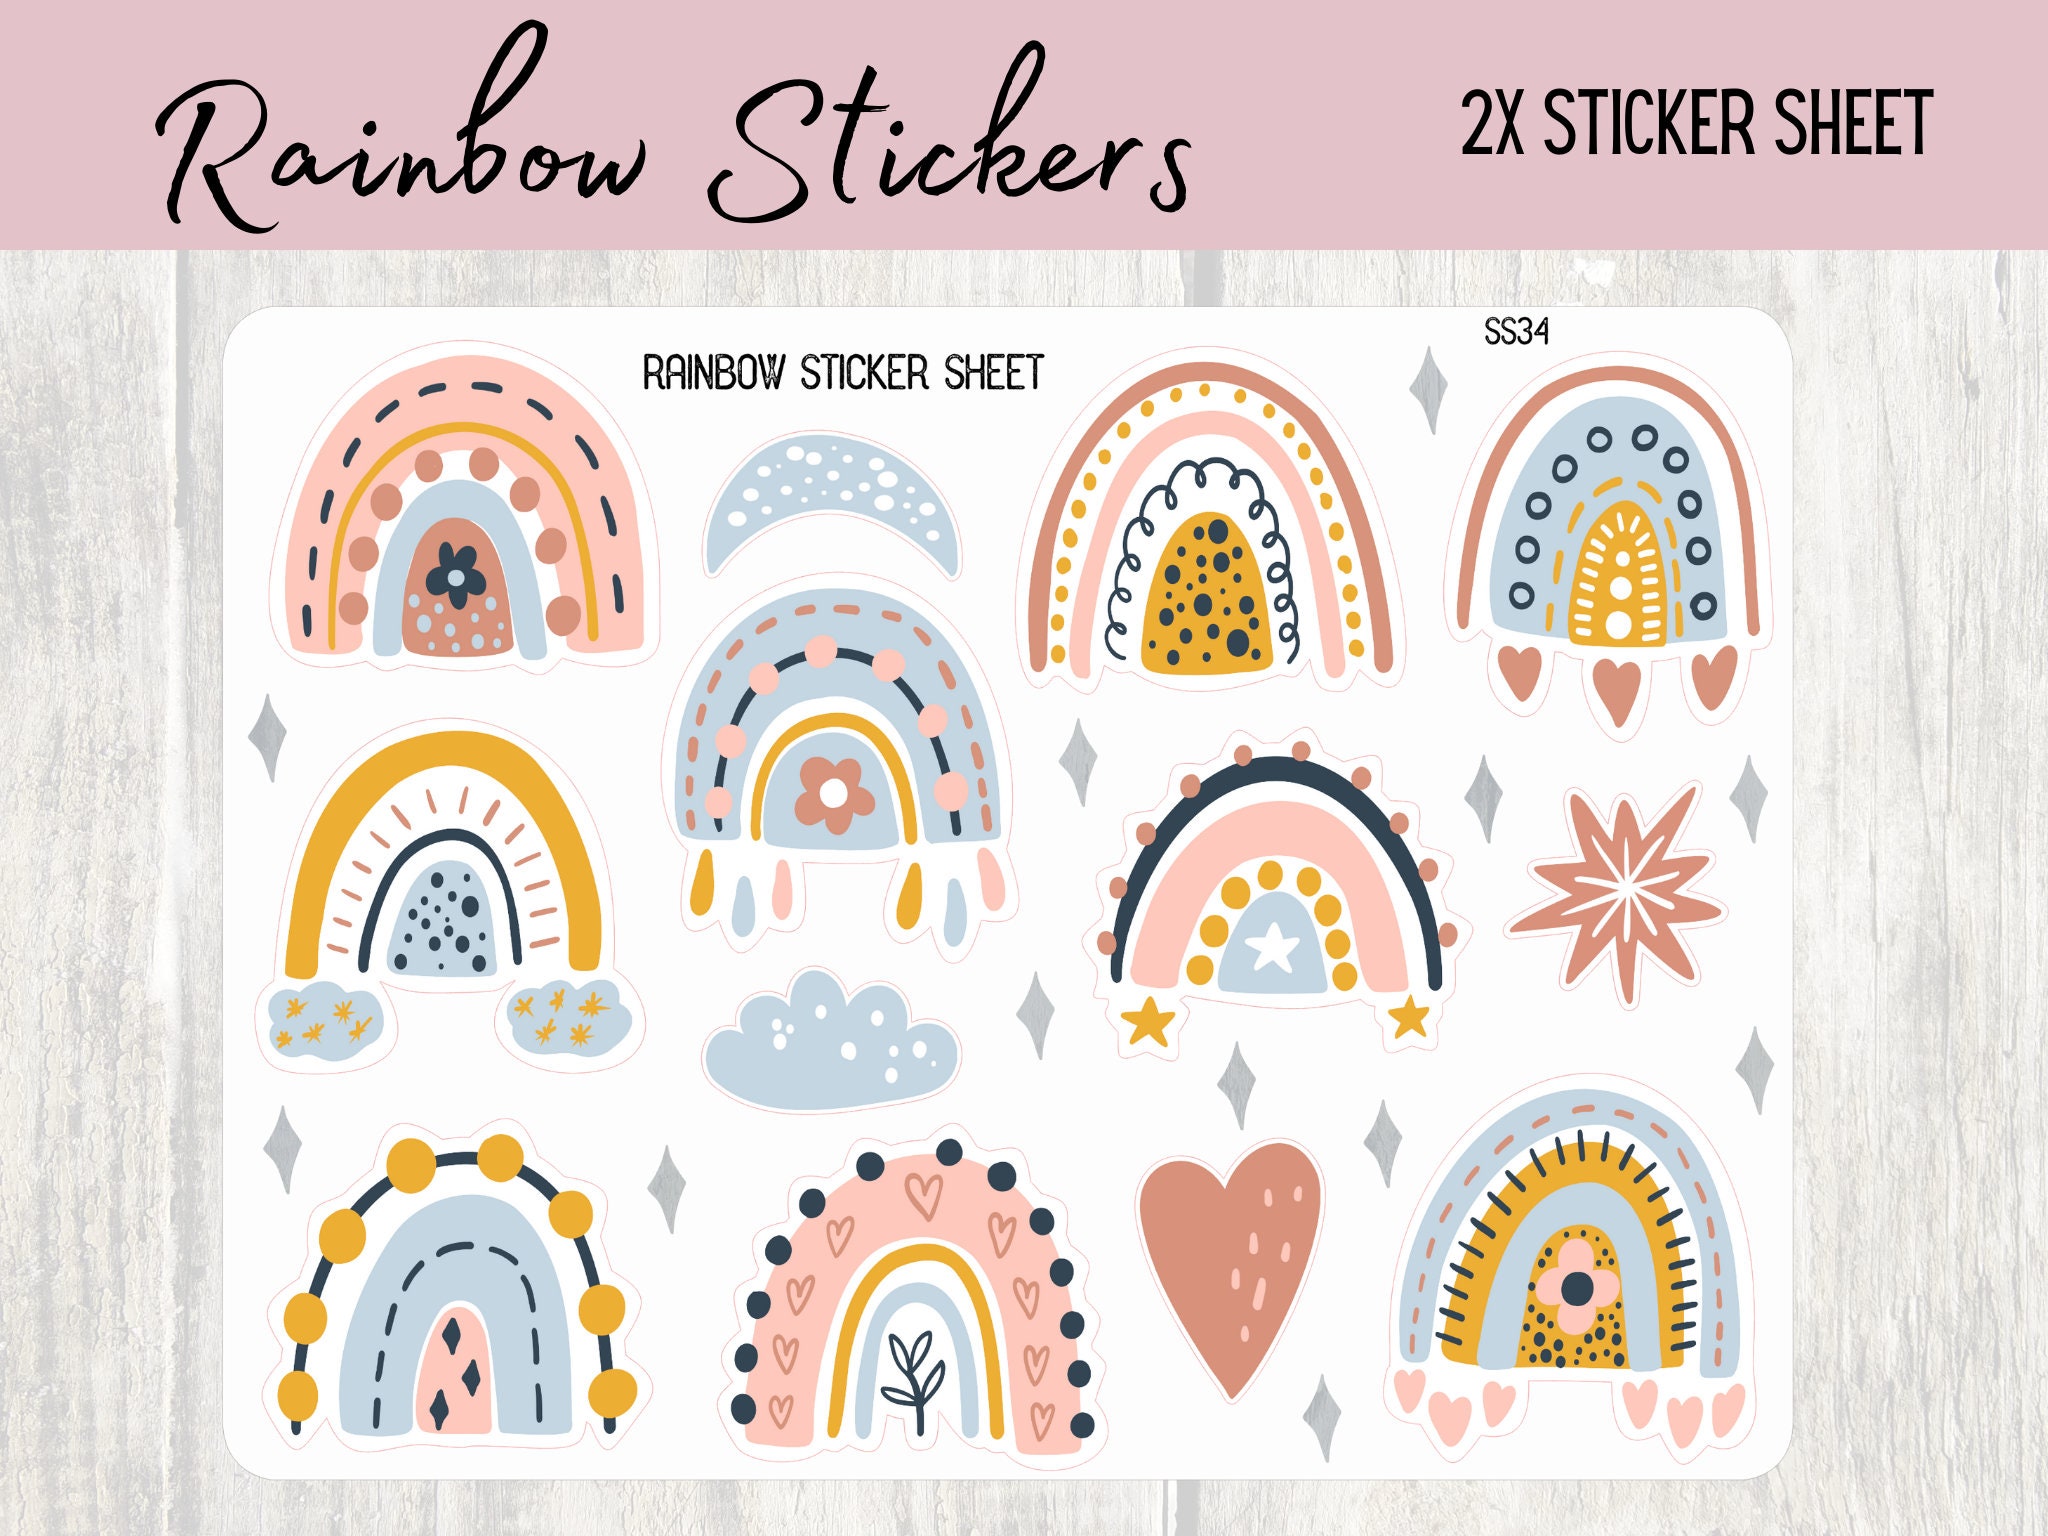 Christian Stickers. 2x Sheets Stickers. Planers, Bible Journaling